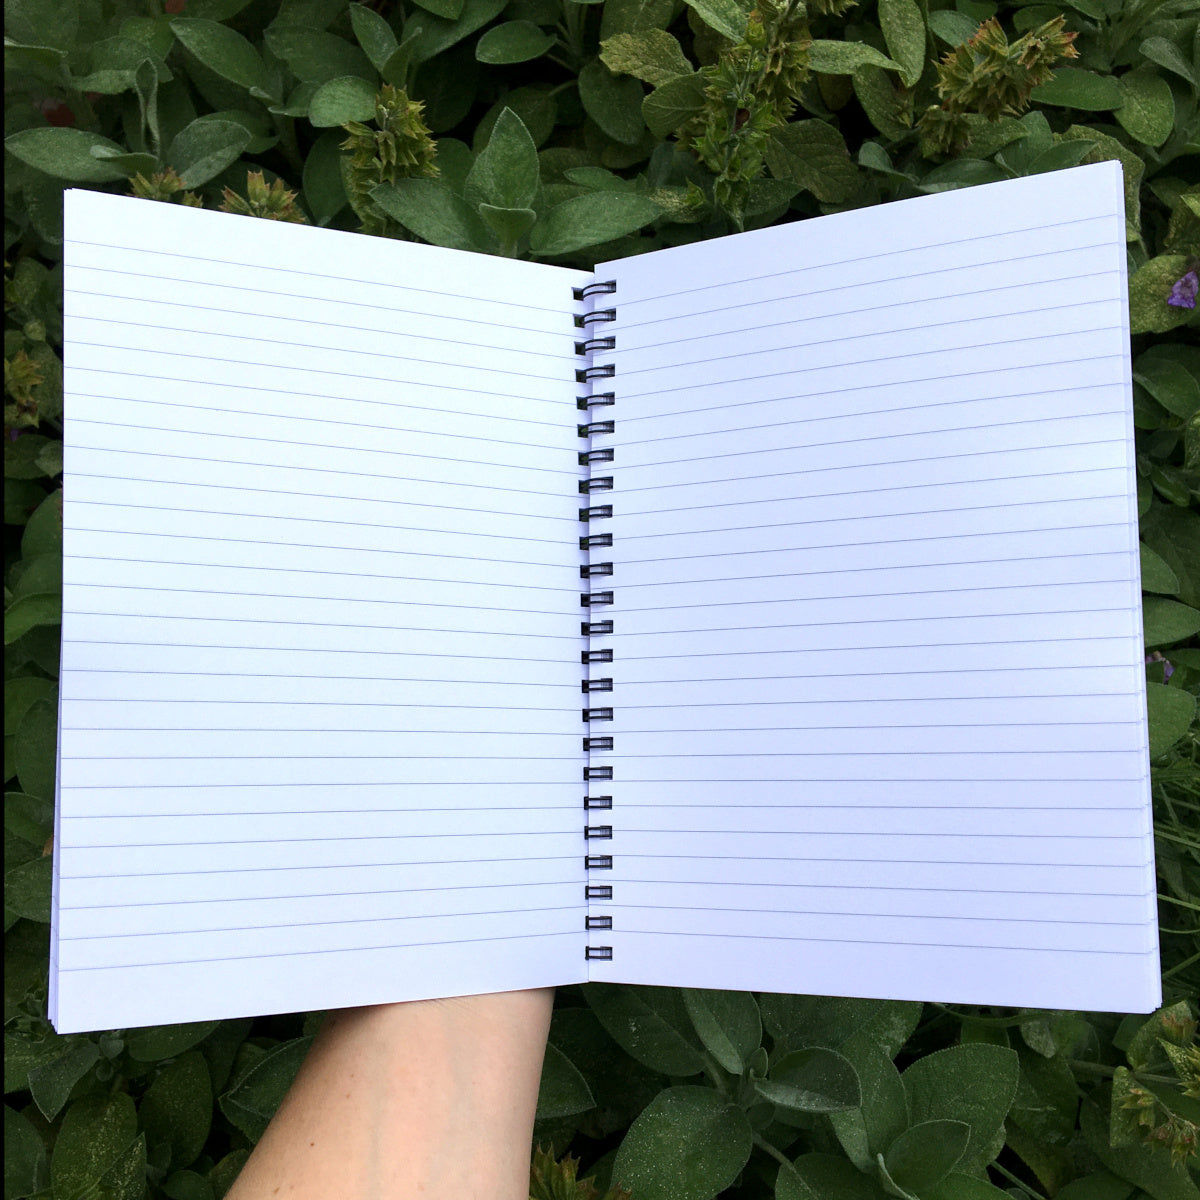 An open notebook held in a hand showing what the lined pages option looks like. Lined white paper and spiral binding.